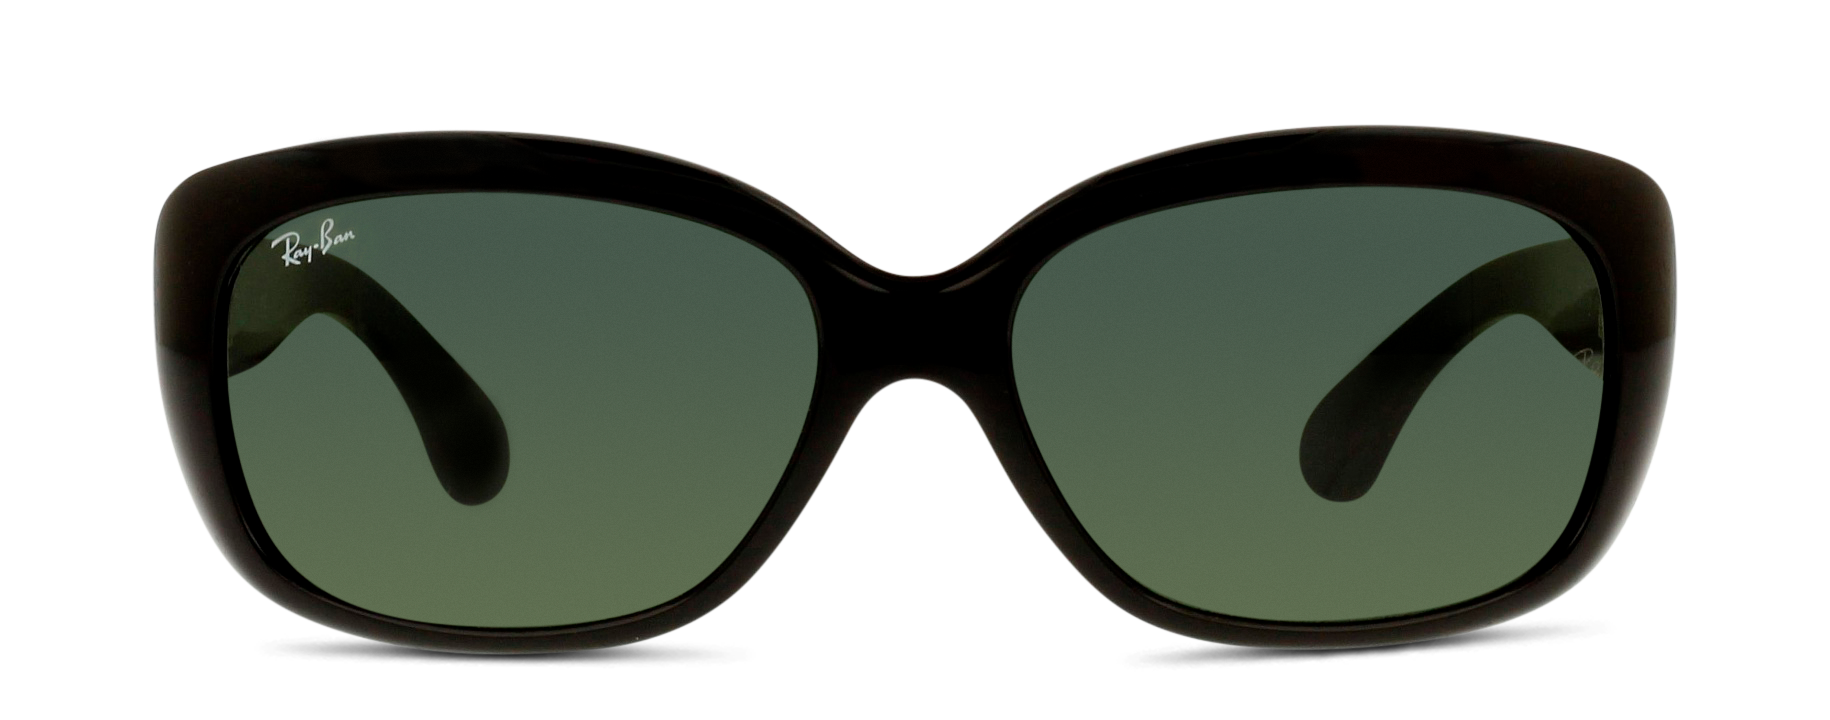 [products.image.front] RAY-BAN RB4101 601